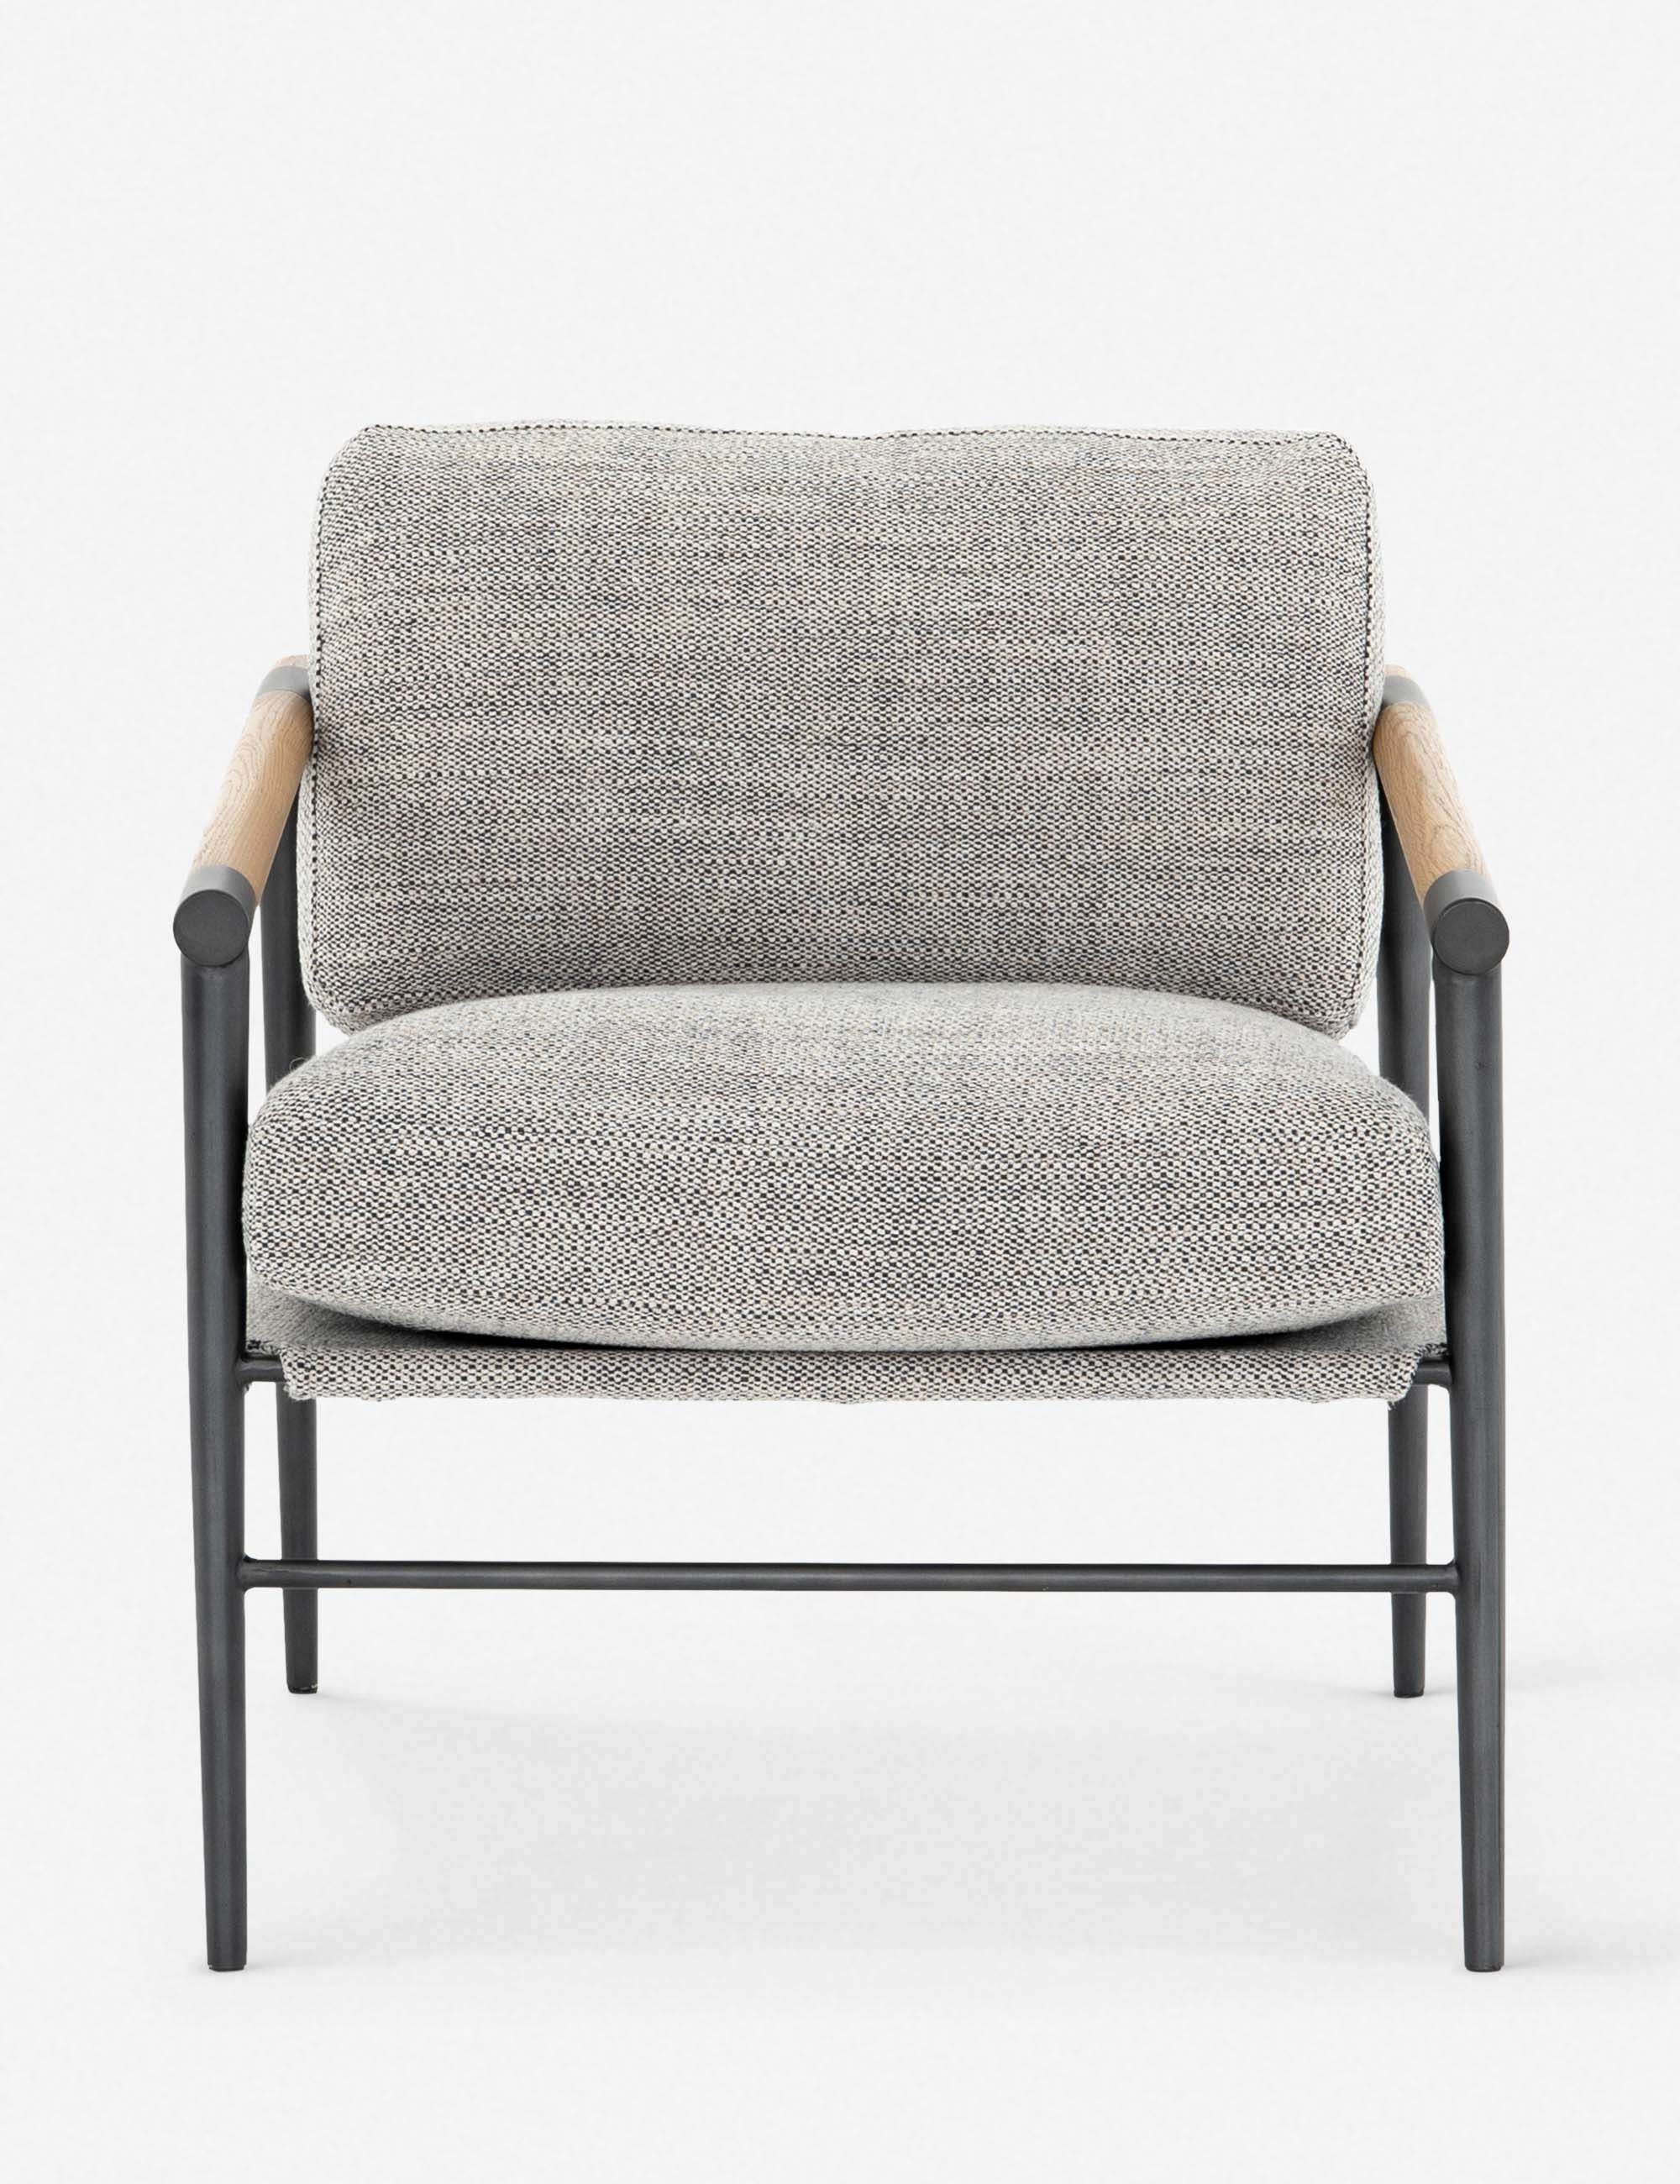 Anevy Accent Chair - Image 1